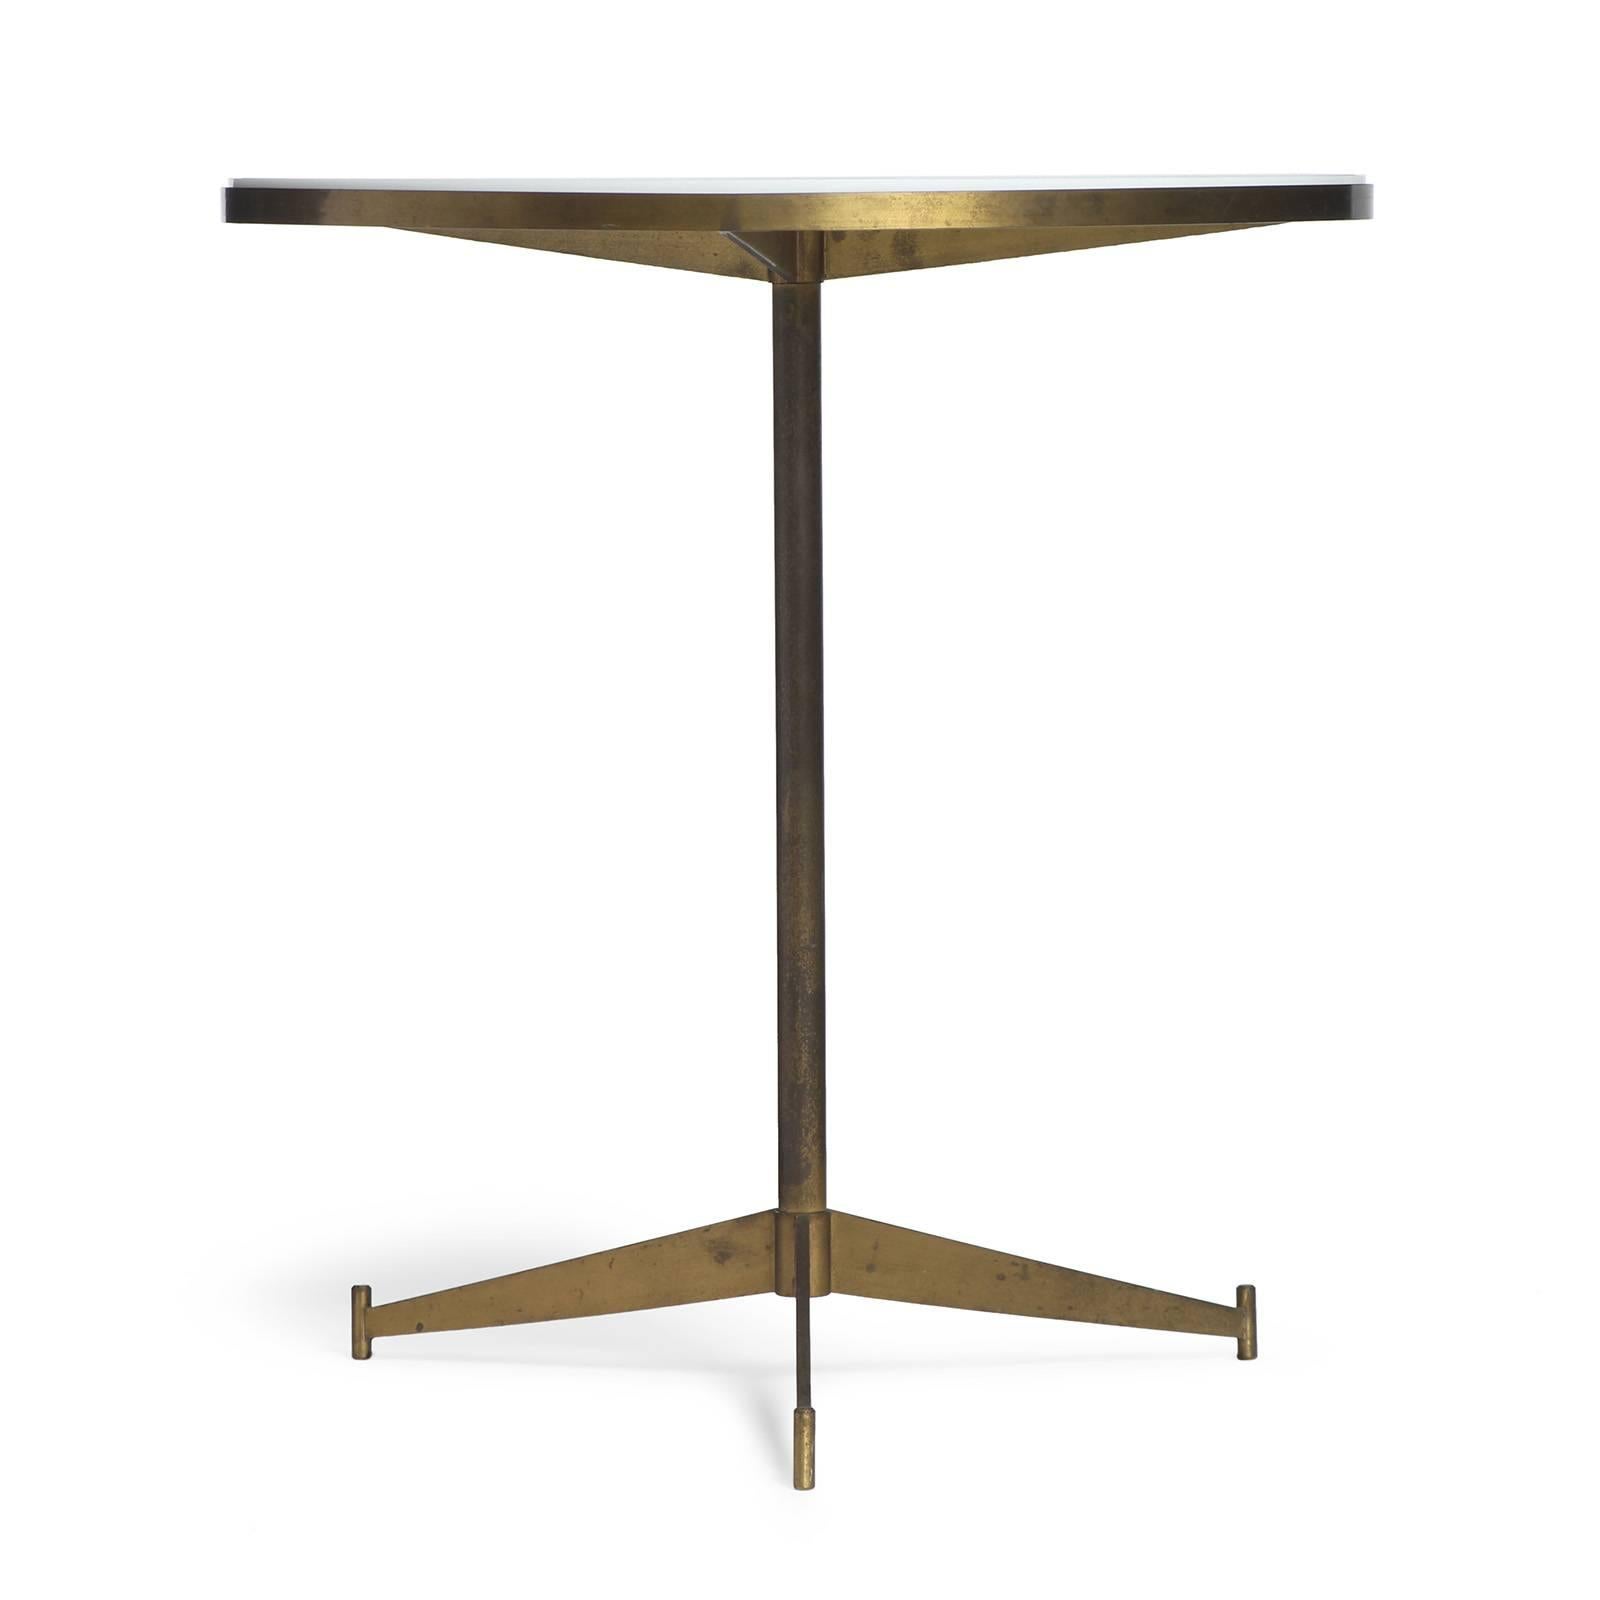 A fine brass side table having an inset opaque white glass top, pedestal with tripod base.